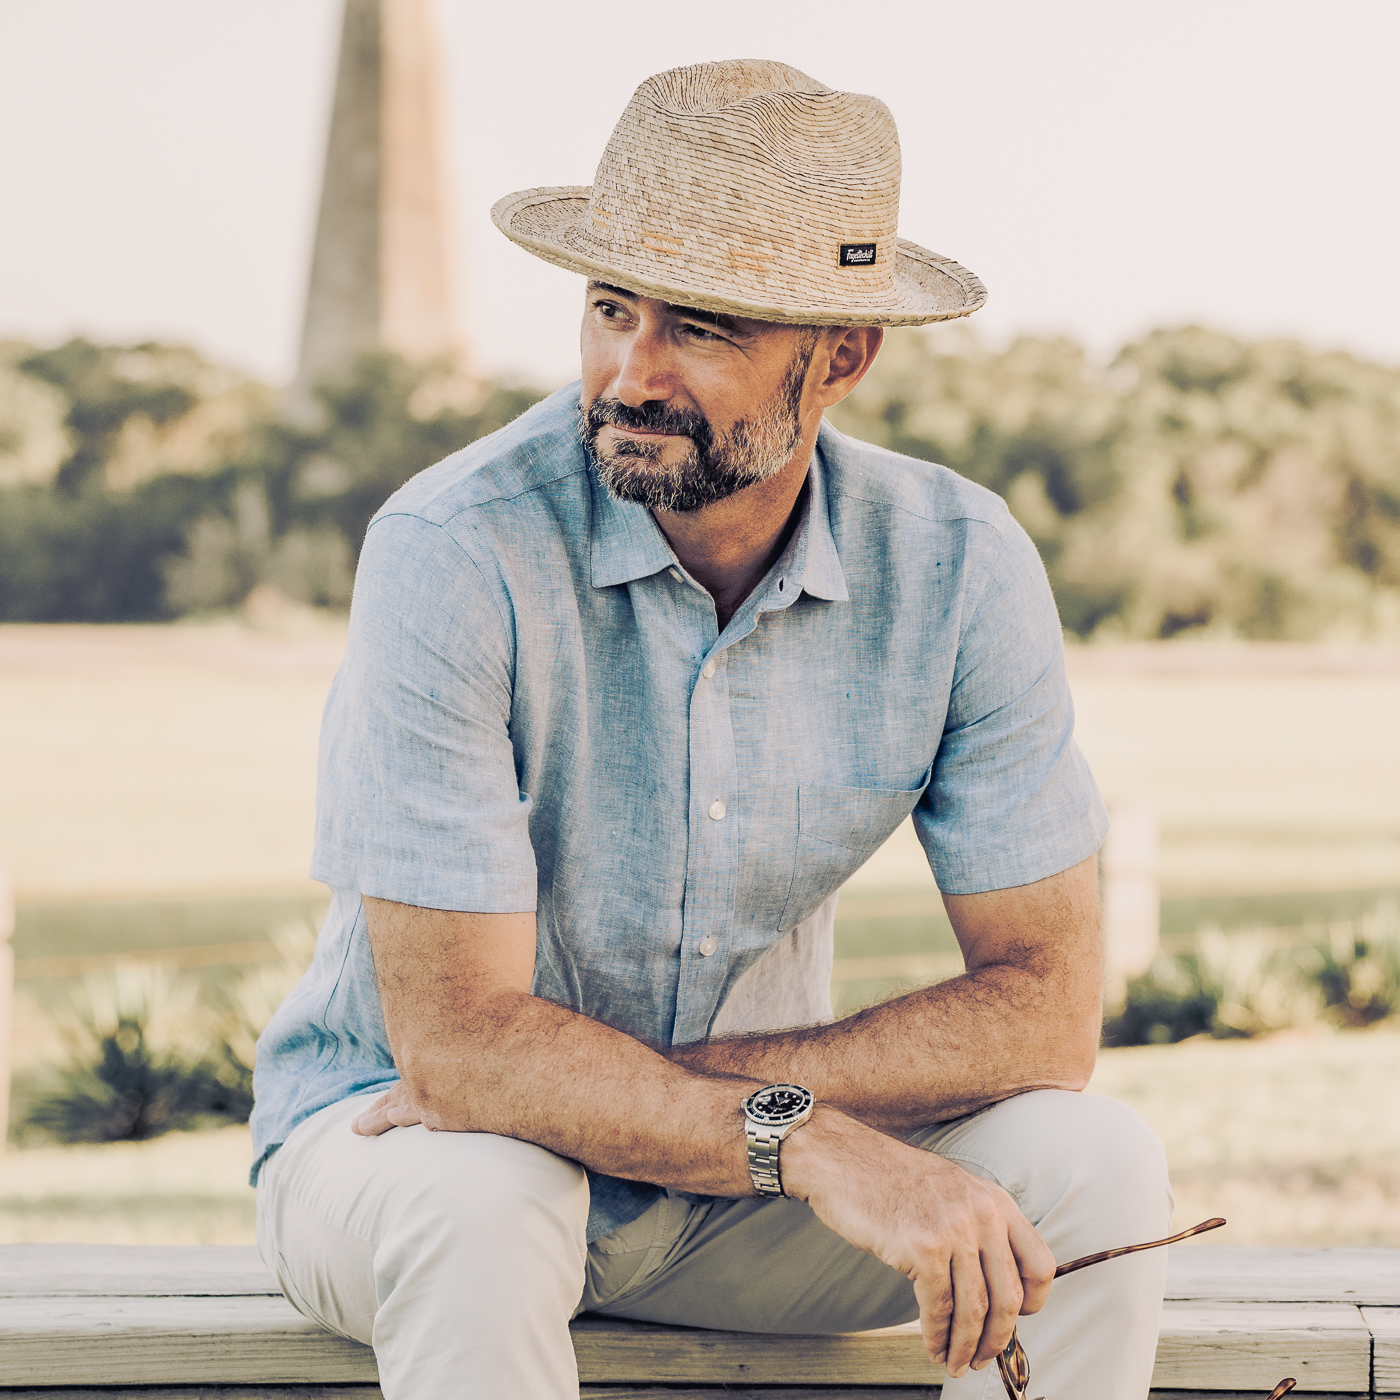 lifestyle image of man in fedora hat - wilmington nc lifestyle photographer - lifestyle photography - chris lang photography 